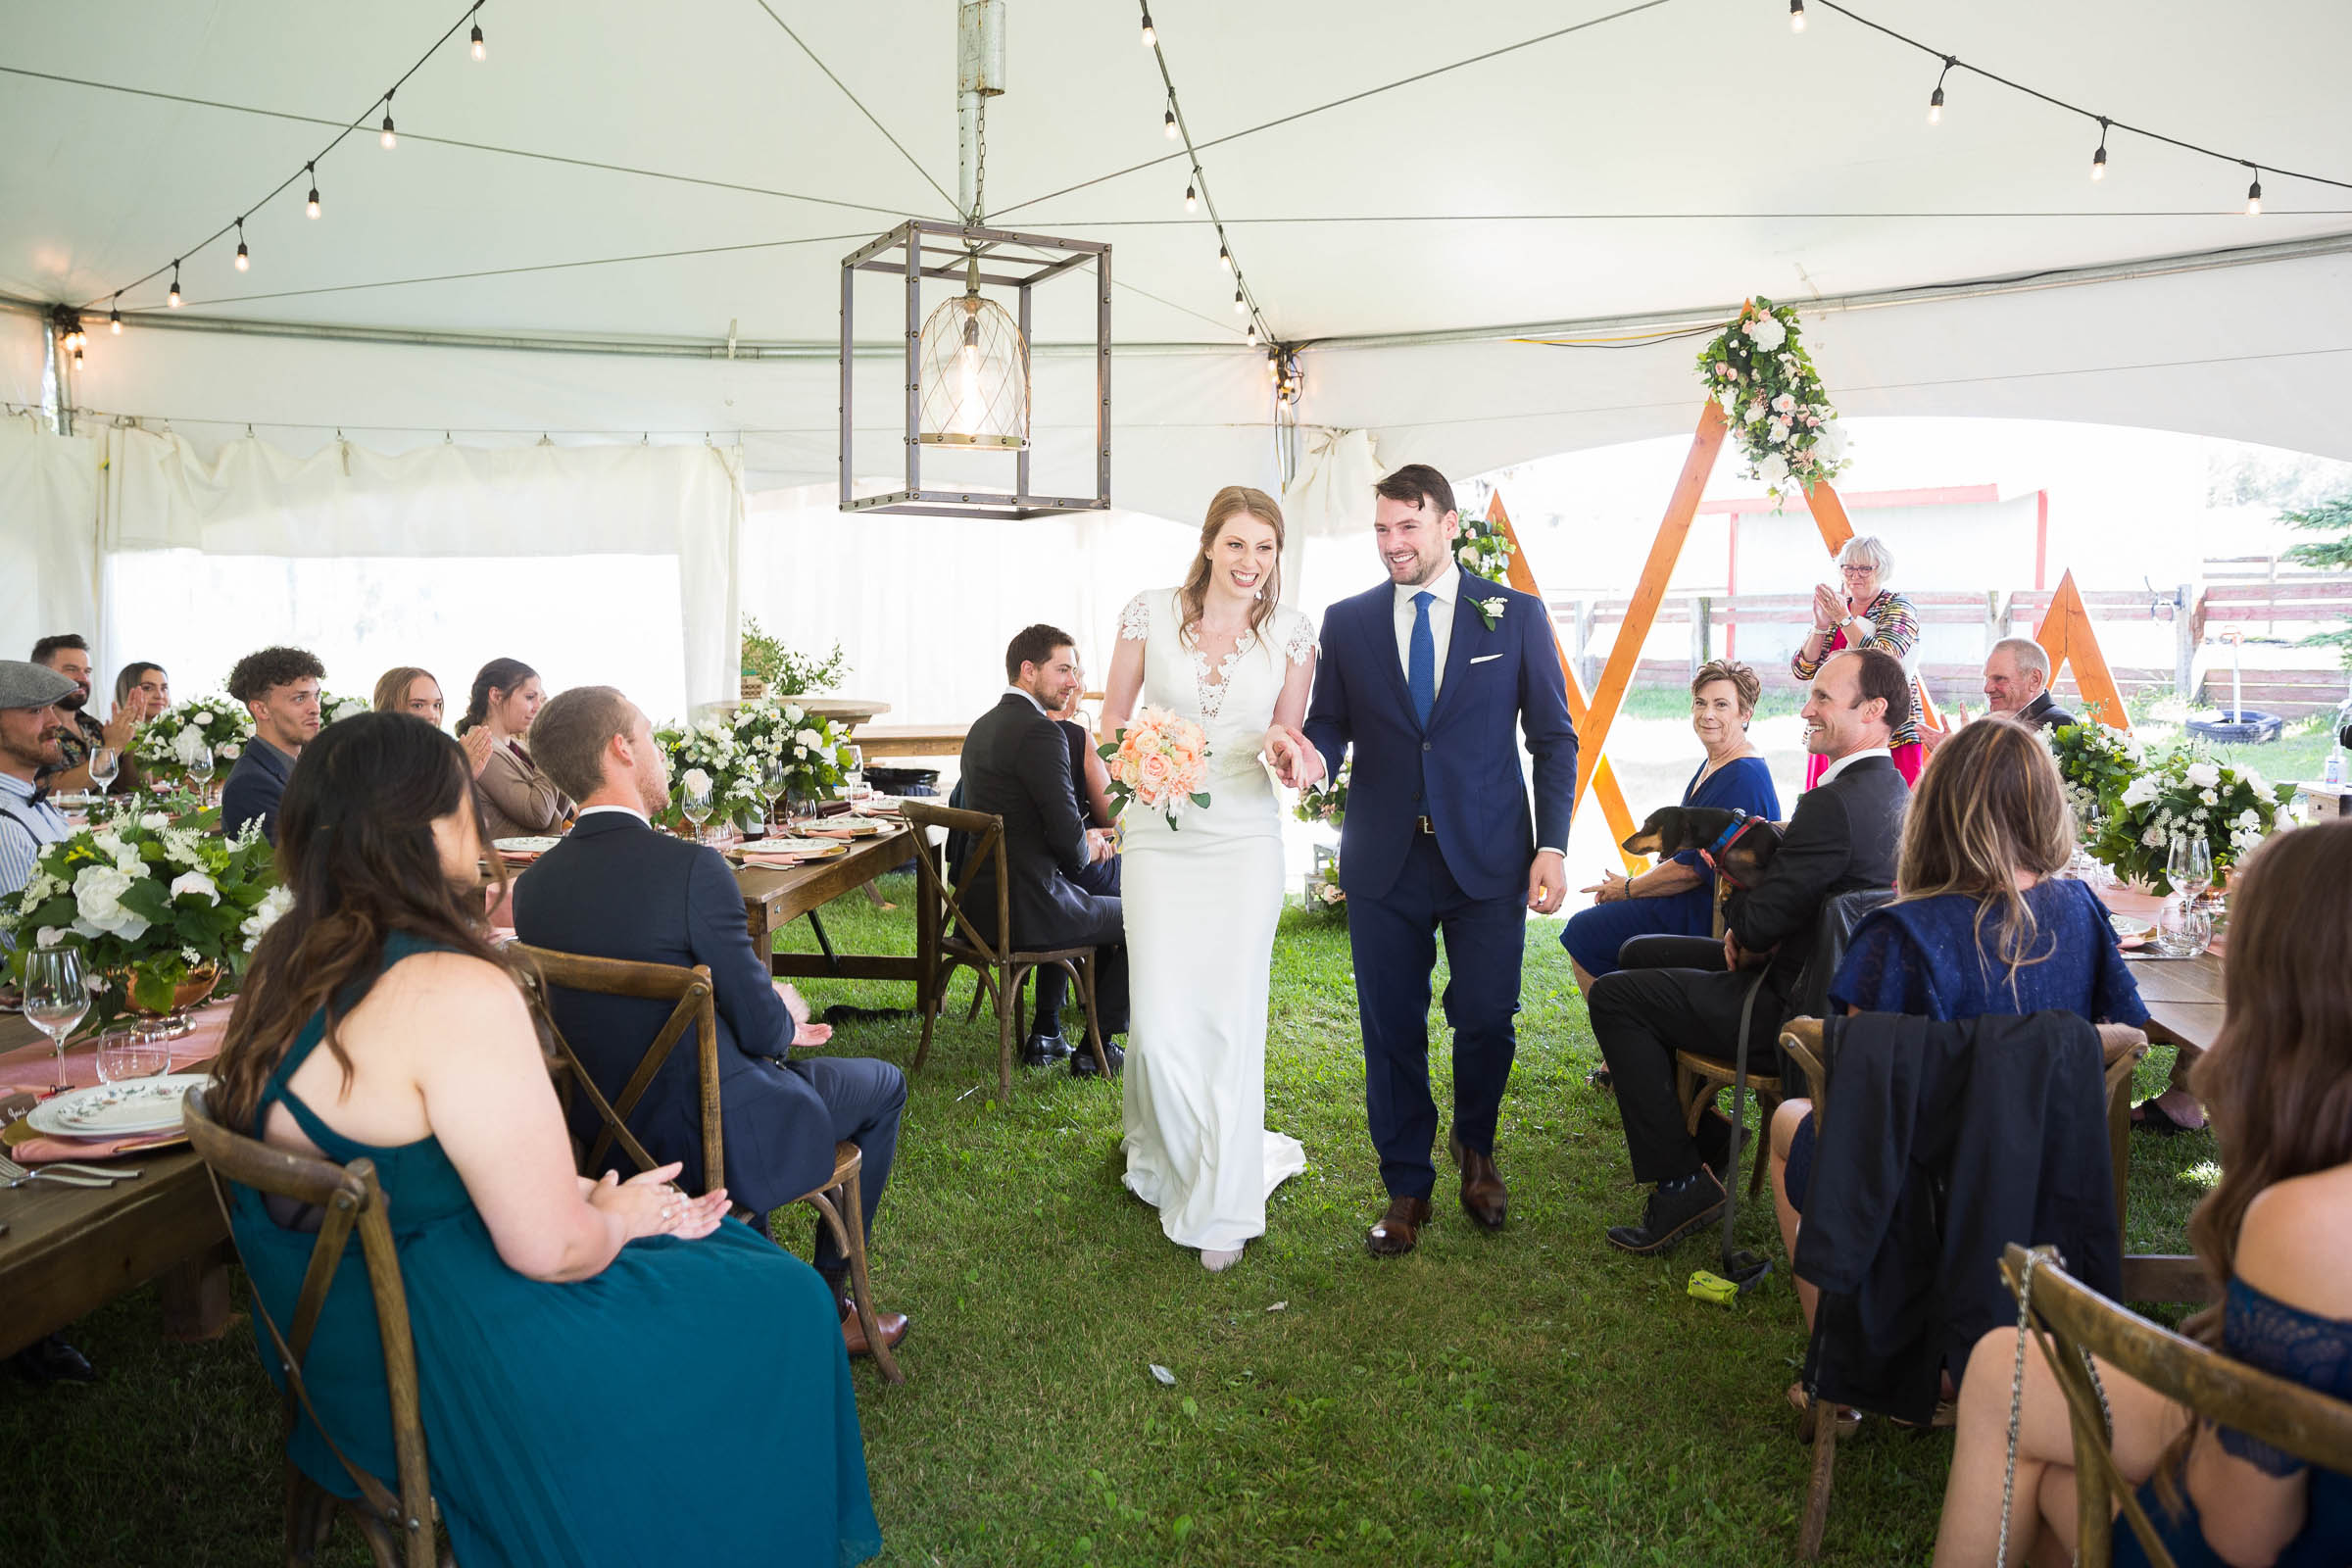 Couple exiting tenting wedding with huge smiles